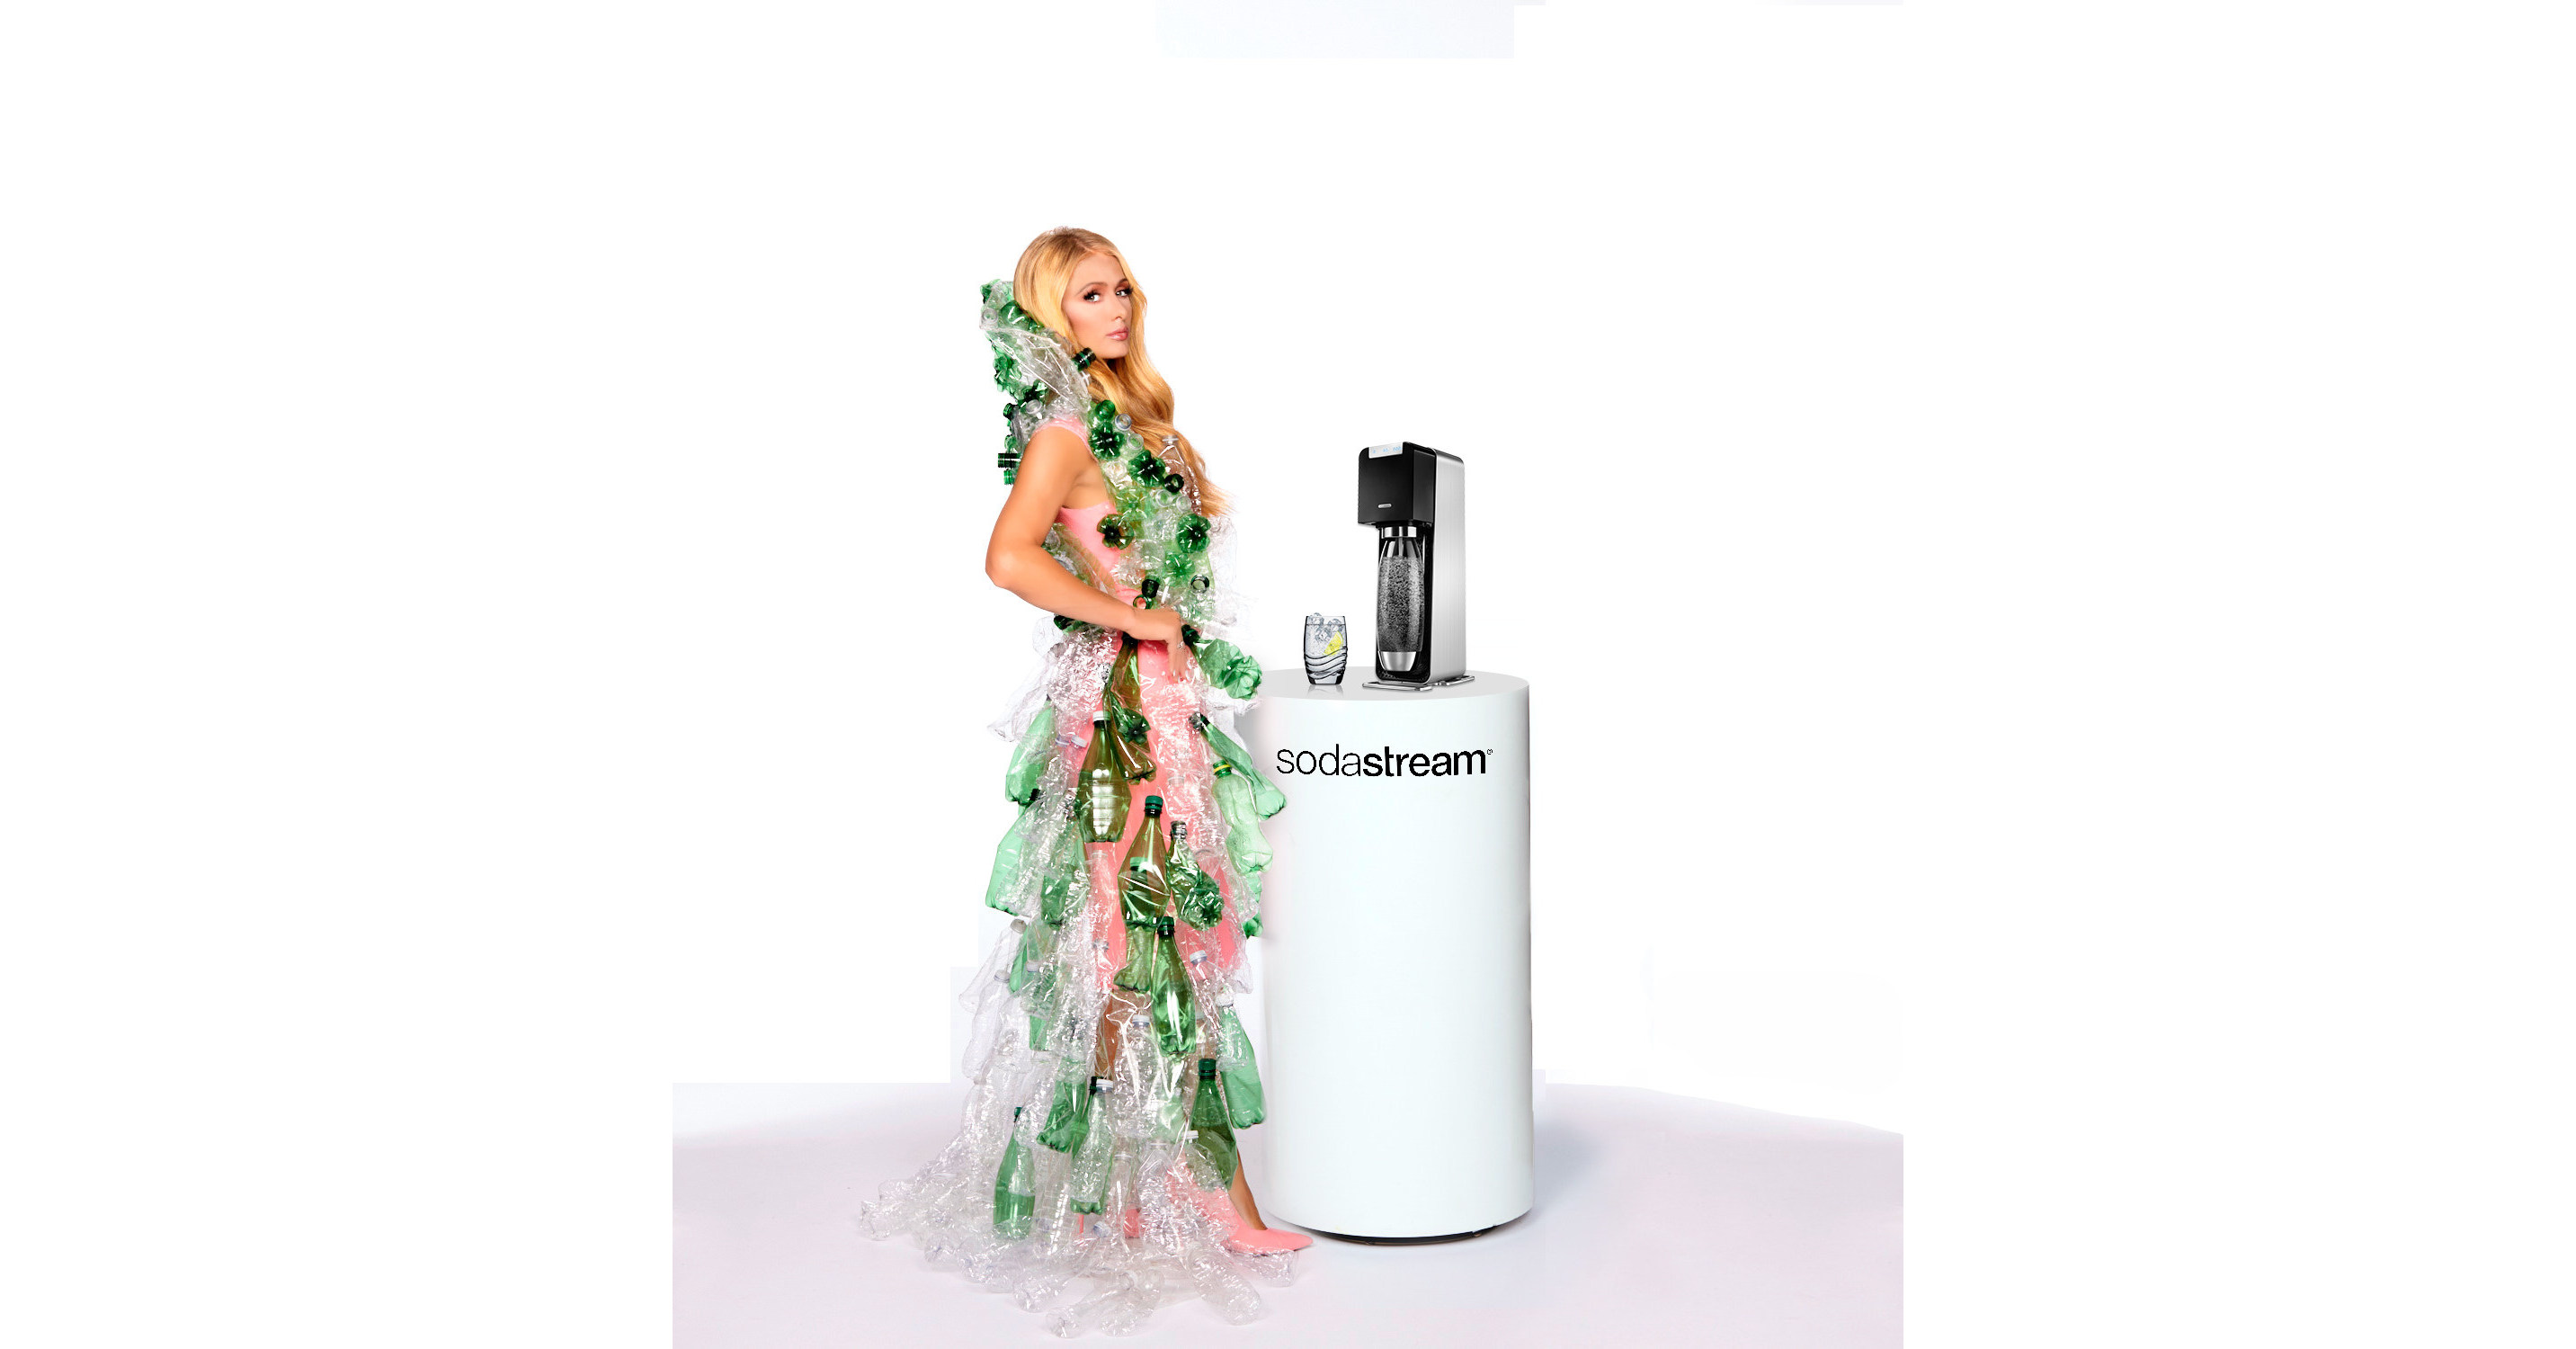 Paris Hilton is selling tiny bottles of sparkling water, but for a